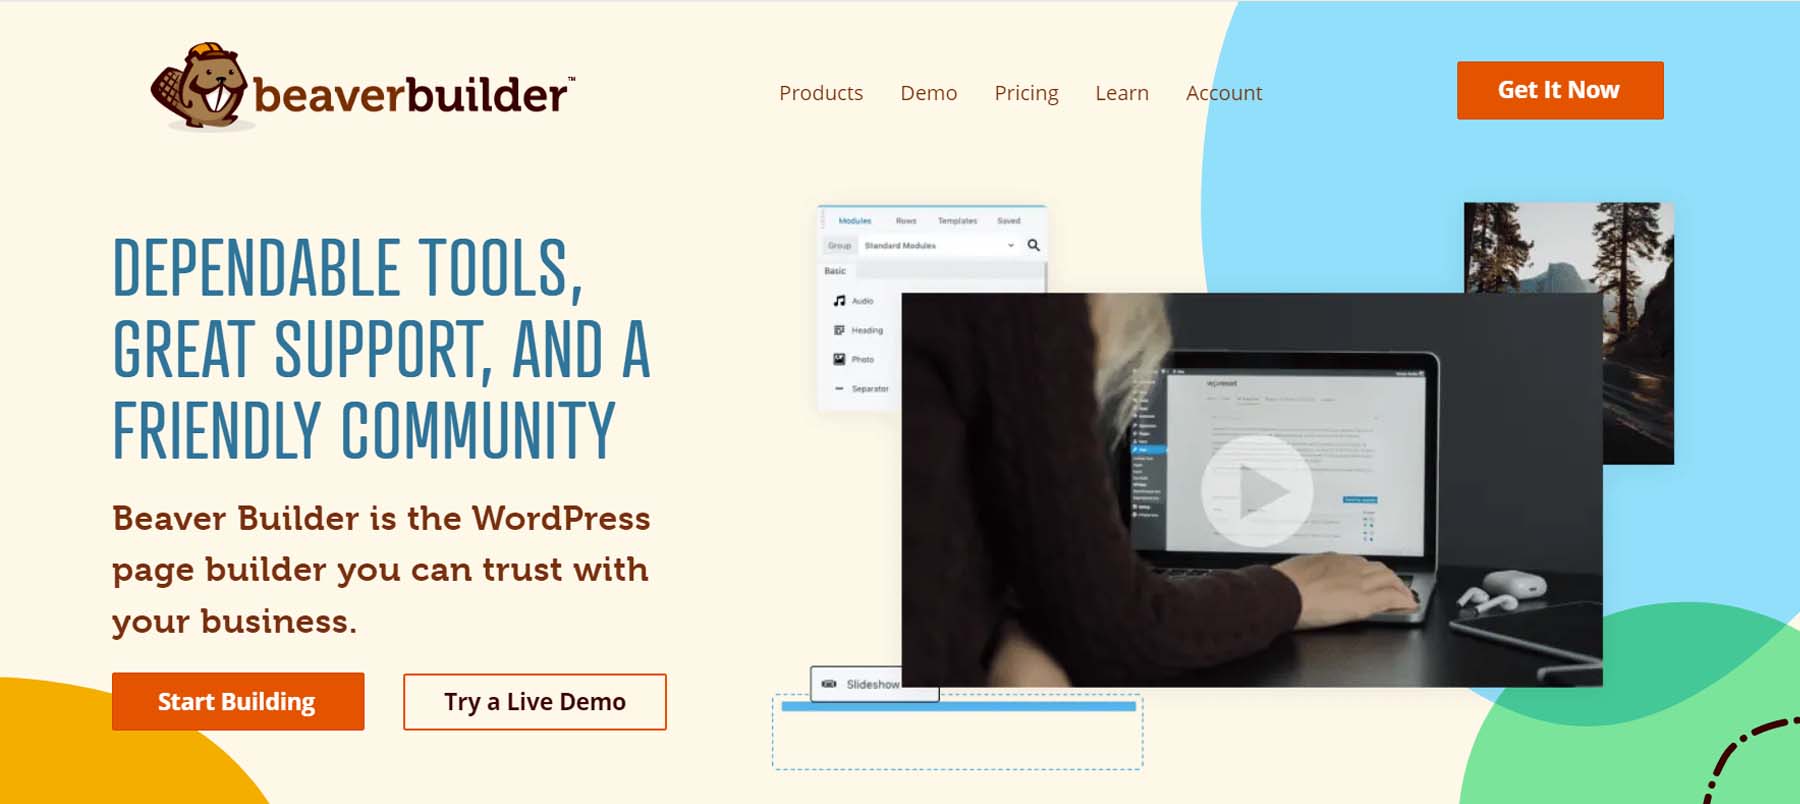 Beaver Builder is a WordPress plugin that is also available in the WP plugin repo